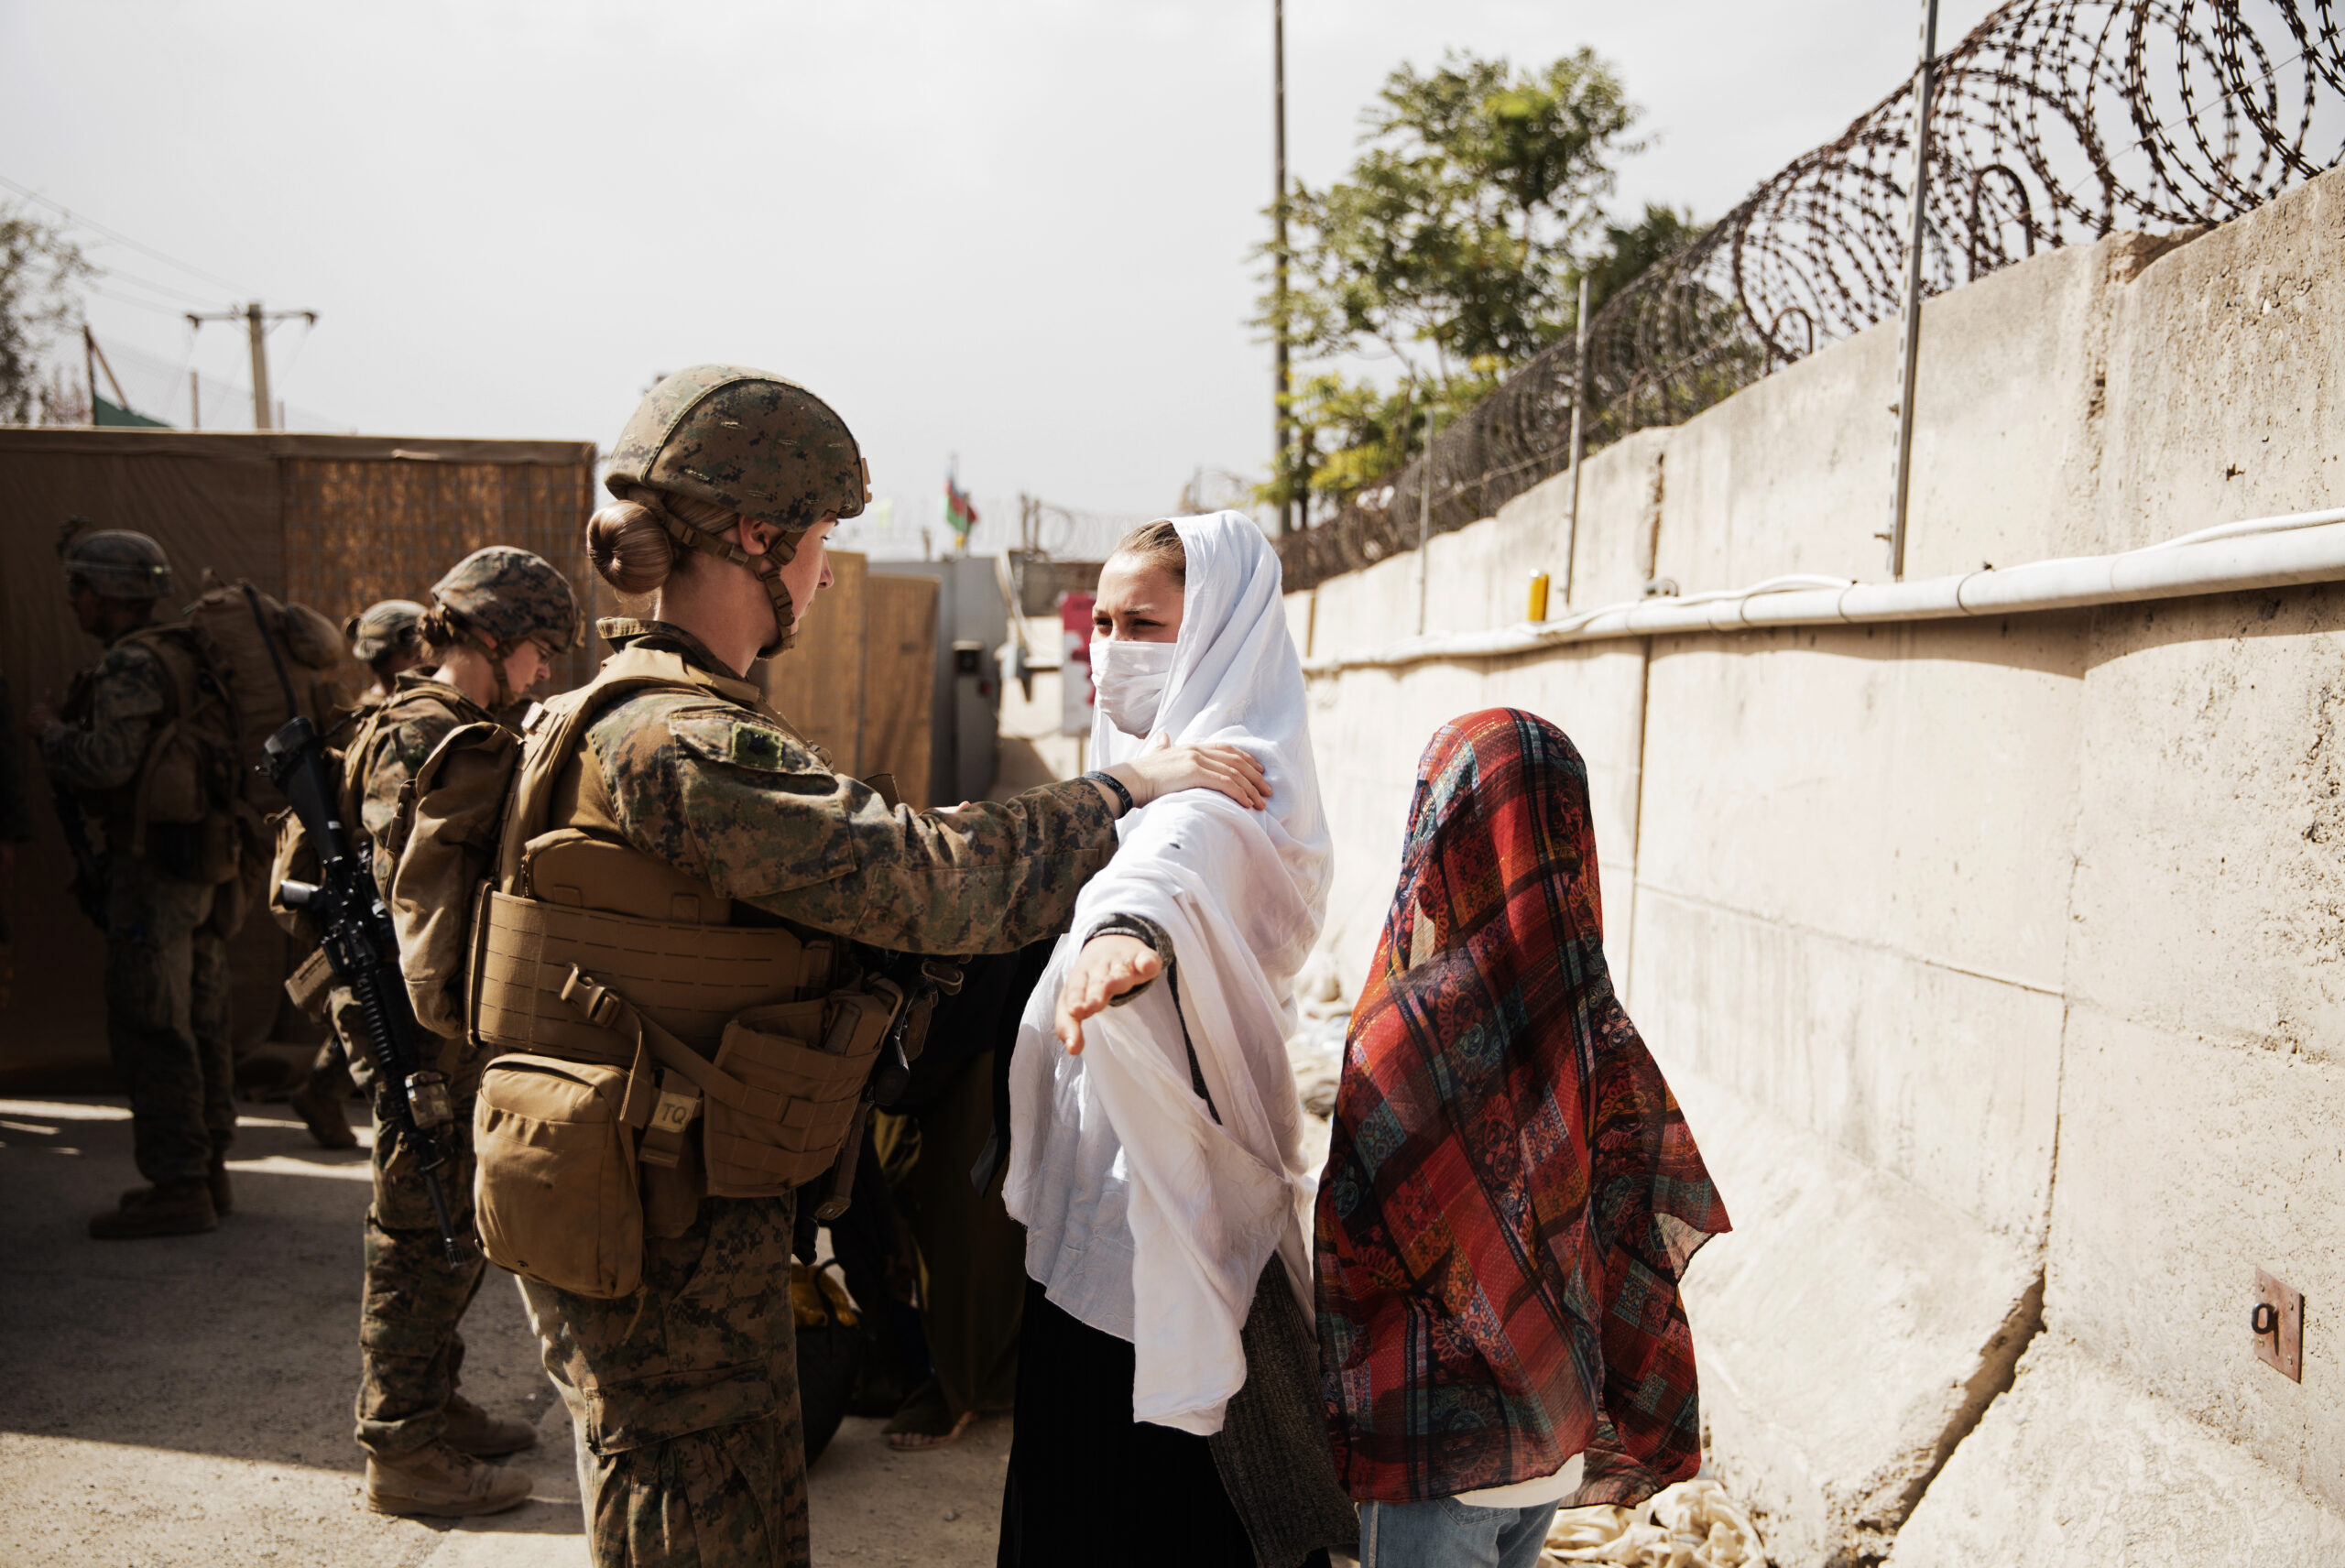 In this photo provided by the U.S. Marine Corps, two civilians during processing through an Evacuee Control Checkpoint during an evacuation at Hamid Karzai International Airport, in Kabul, Afghanistan, Wednesday, Aug. 18, 2021. (Staff Sgt. Victor Mancilla/U.S. Marine Corps via AP)